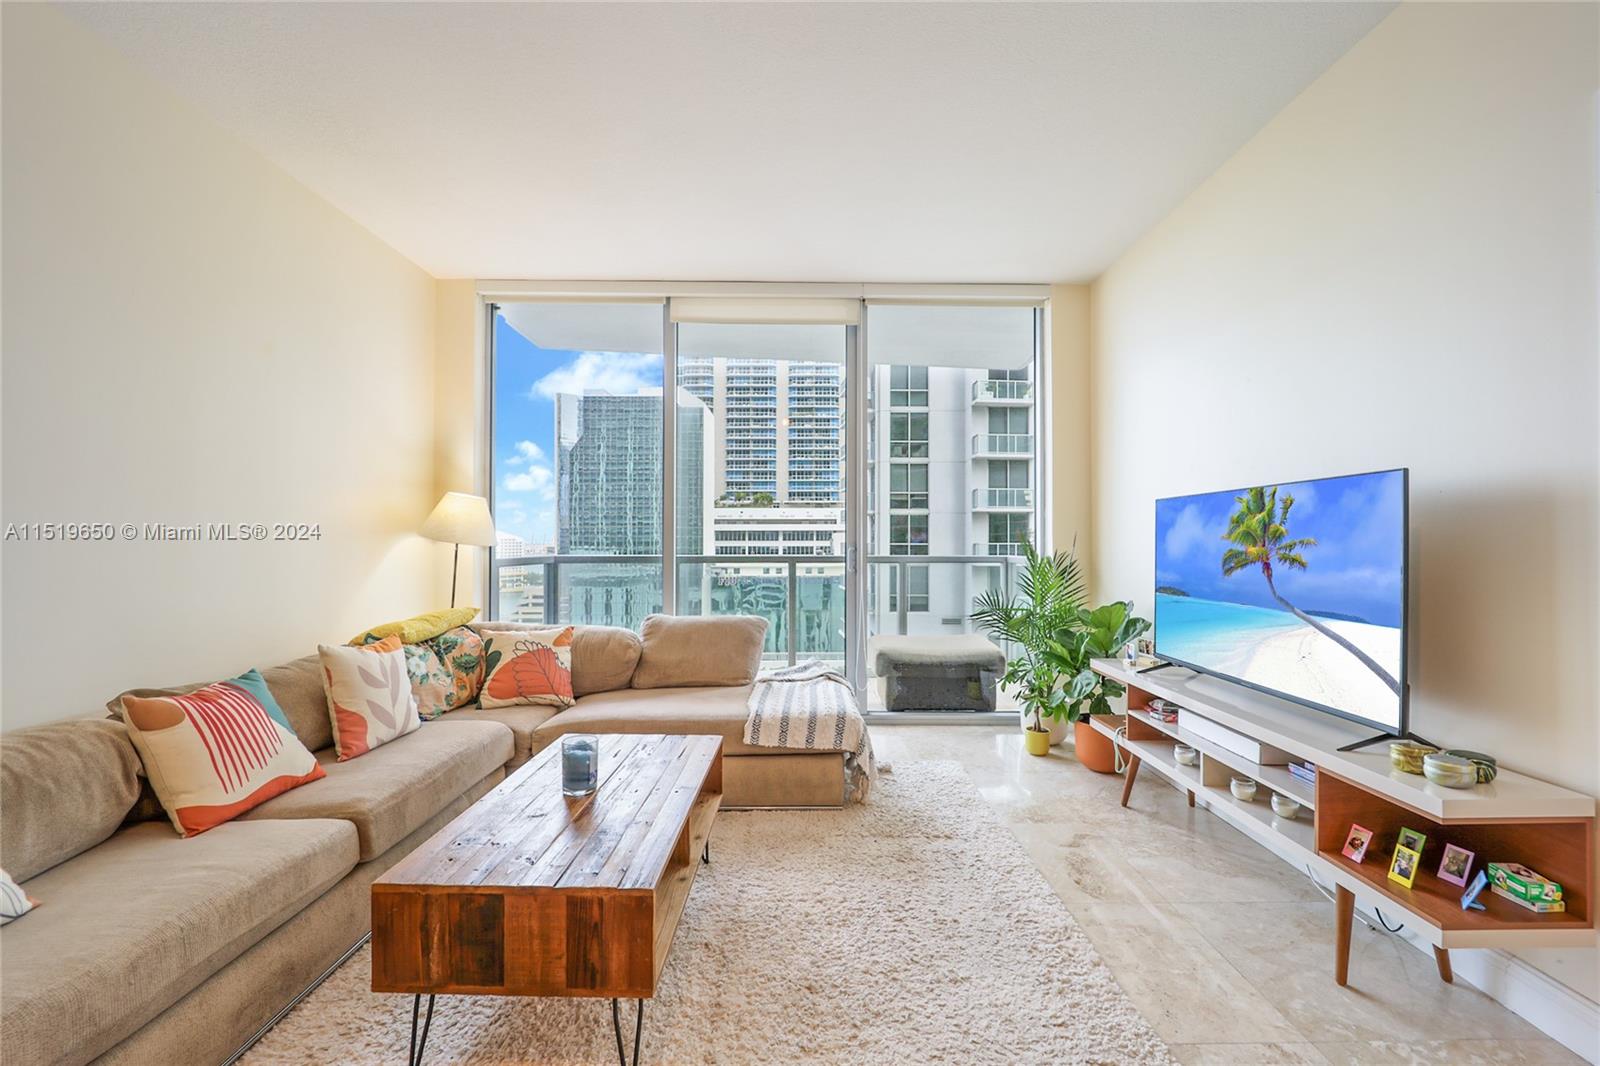 BEST deal and location in BRICKELL, walking distance to everything this vibrant neighborhood has to offer at 1050 Brickell. One bedroom one bath residence facing east & cozy balcony, open kitchen with breakfast island, marble floors, built-in closets for extra storage, 2019 water heater, impact windows, one assigned parking space, day & night window treatments. 1050 Brickell is a full-service building with resort style amenities located short distances to Coconut Grove, Downtown Miami, Miami Beach, MIA, Design District, and more.